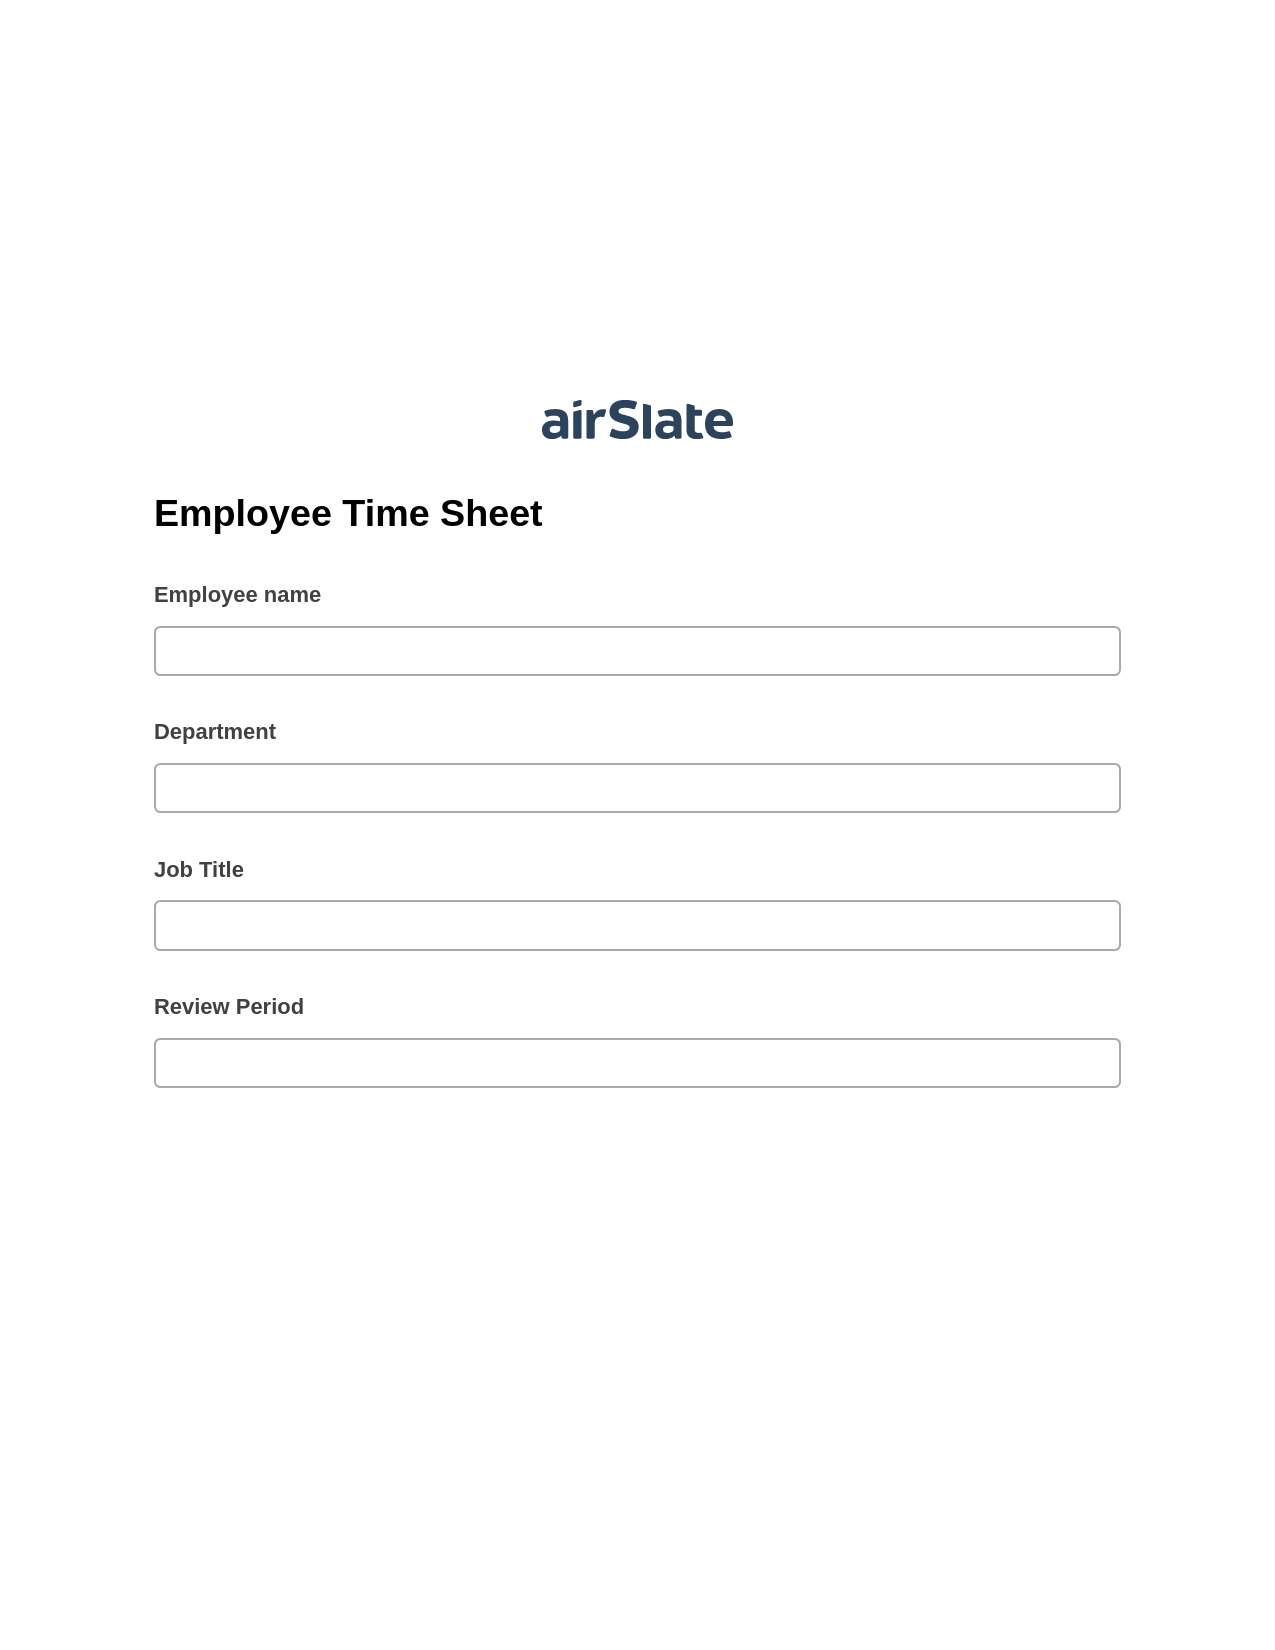 Employee Time Sheet Prefill from NetSuite records, Add Tags to Slate Bot, Archive to Box Bot